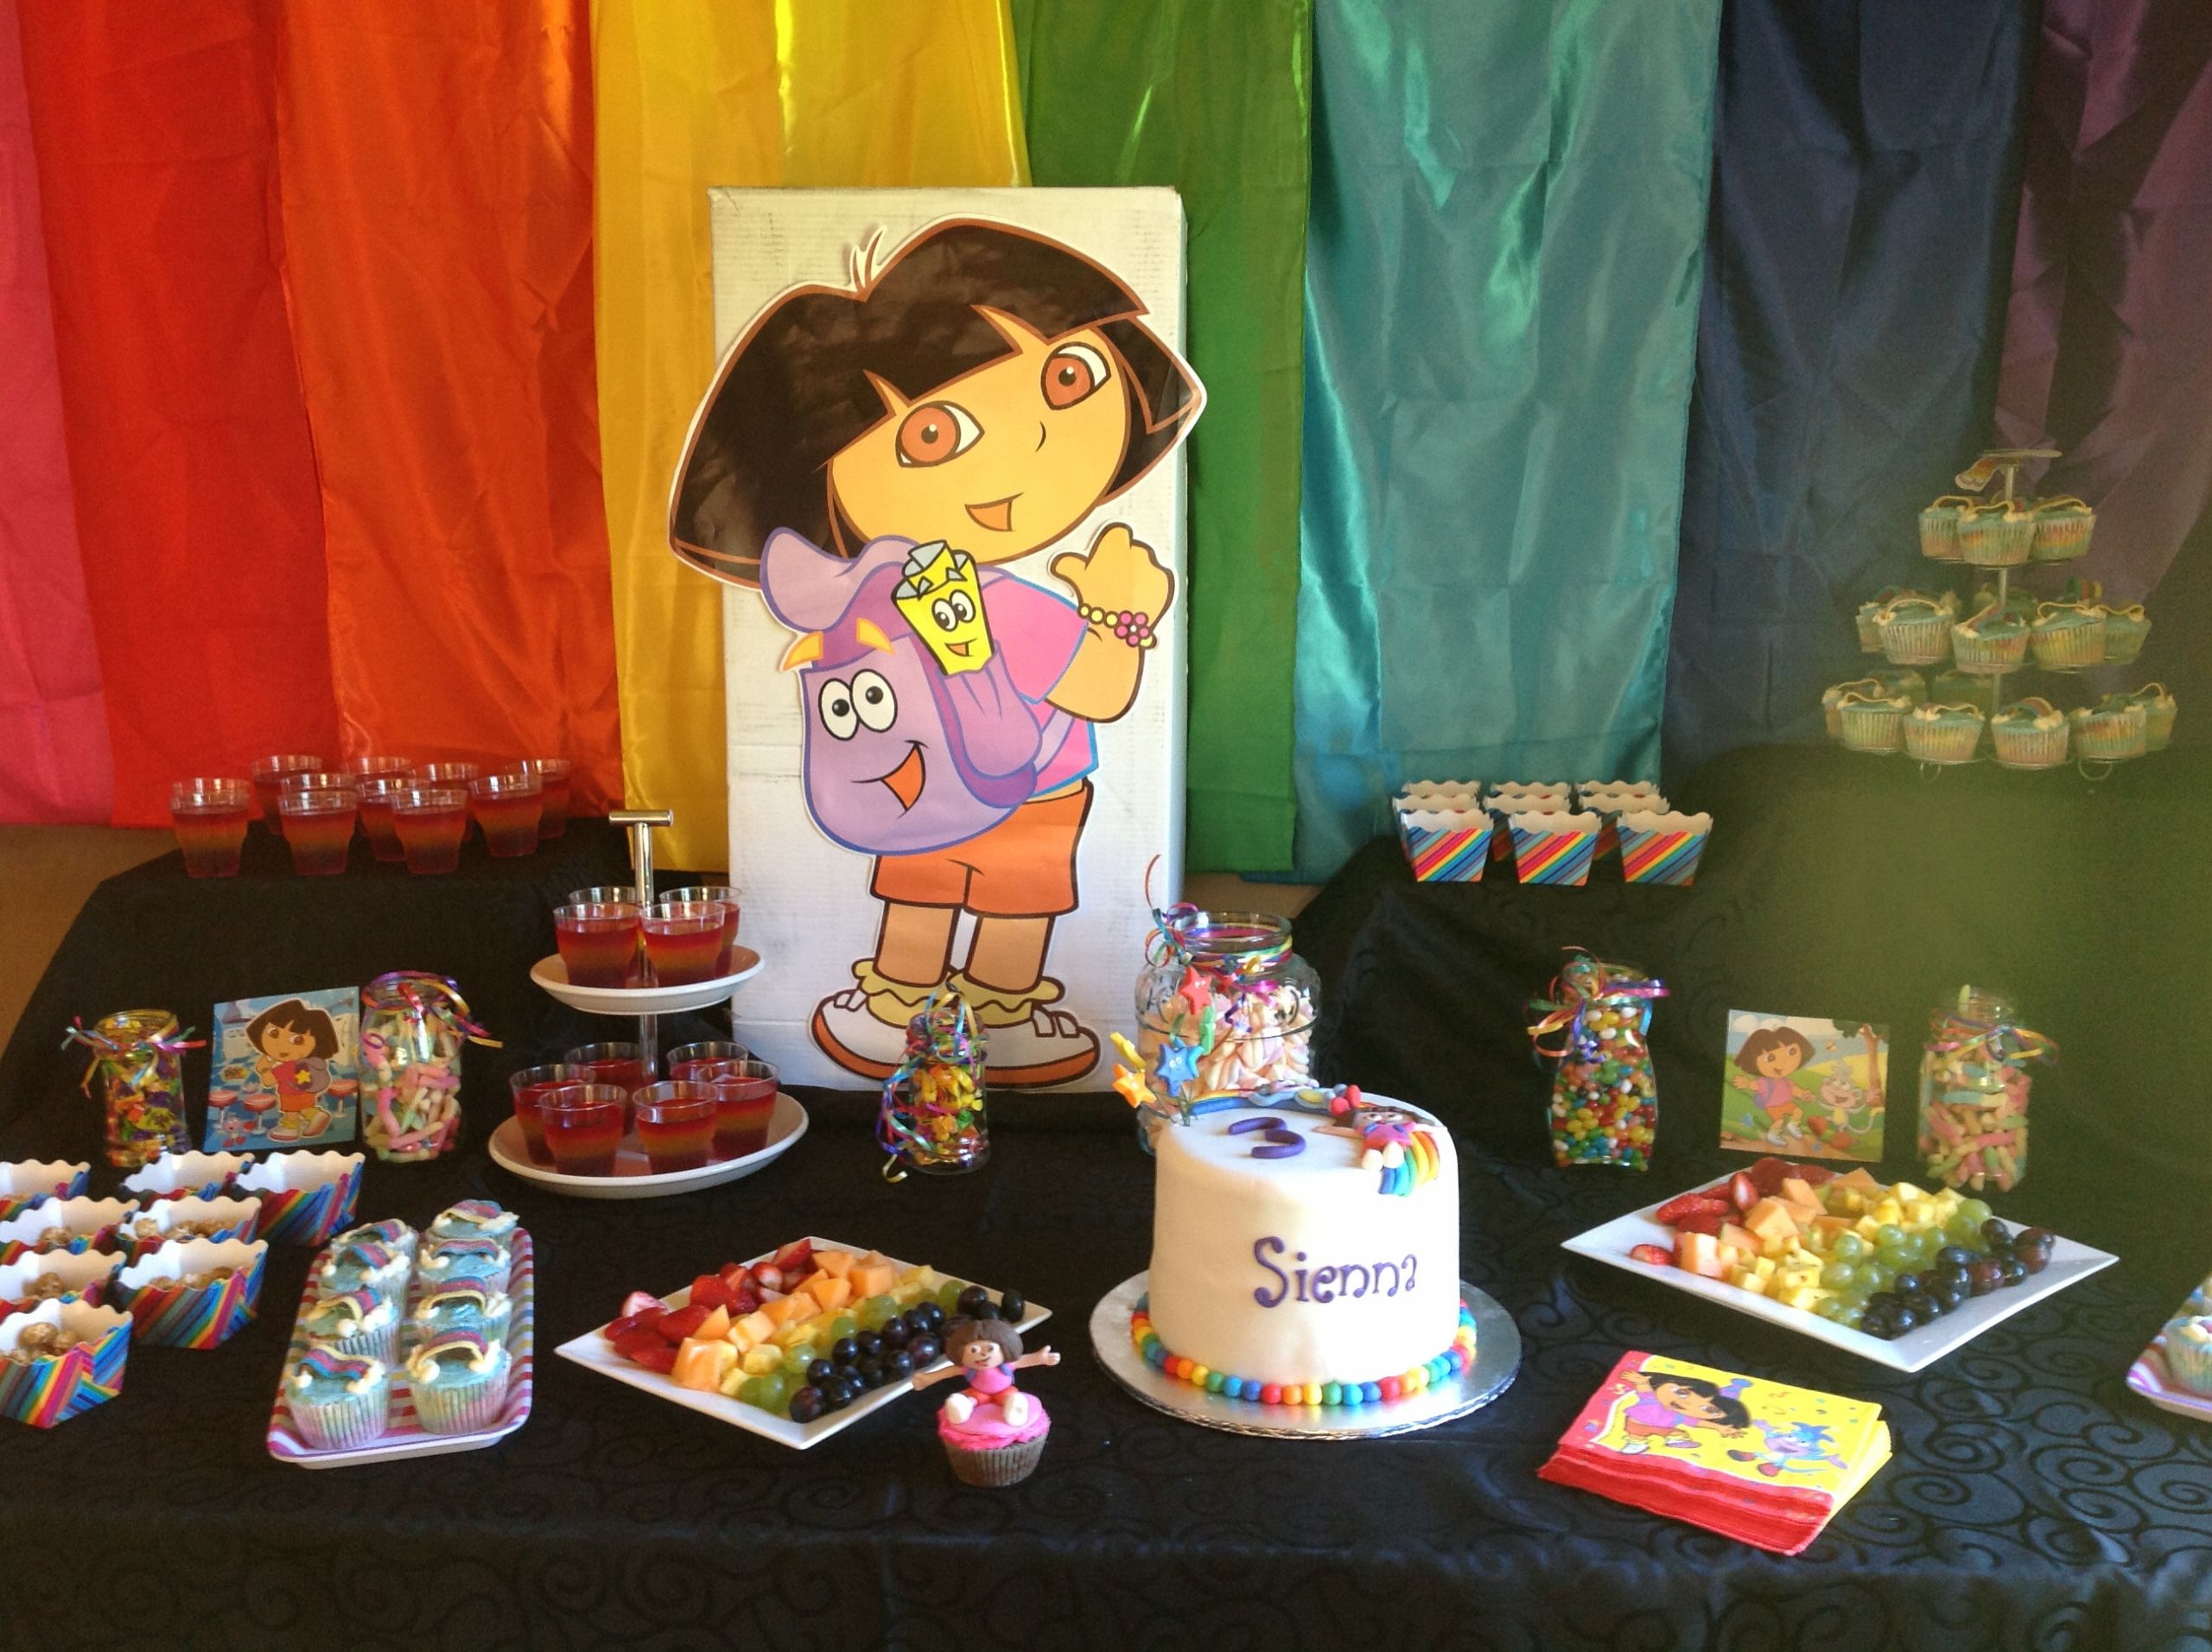 Food Ideas For 3 Year Old Birthday Party
 Dora the Explorer Rainbow party for a 3 year old